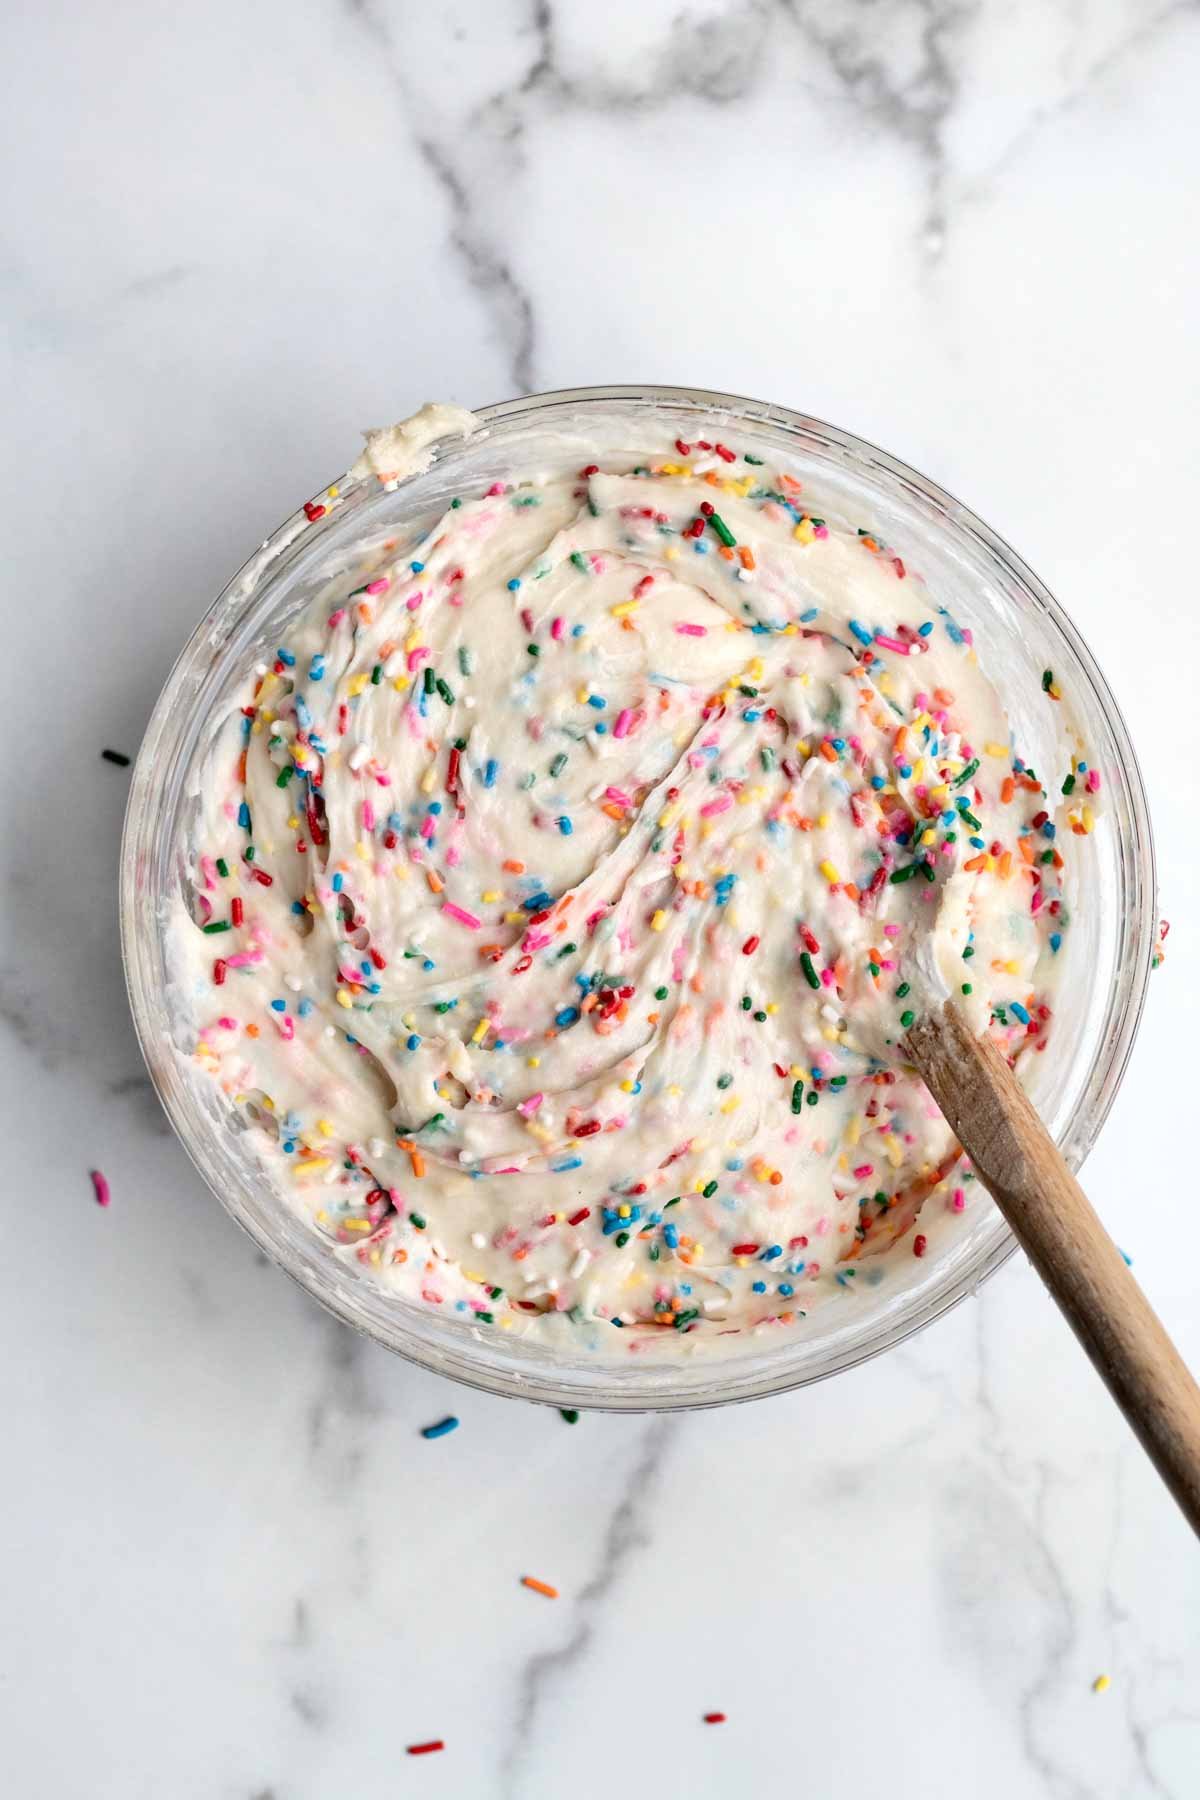 Mixing the rainbow sprinkles thoroughly.